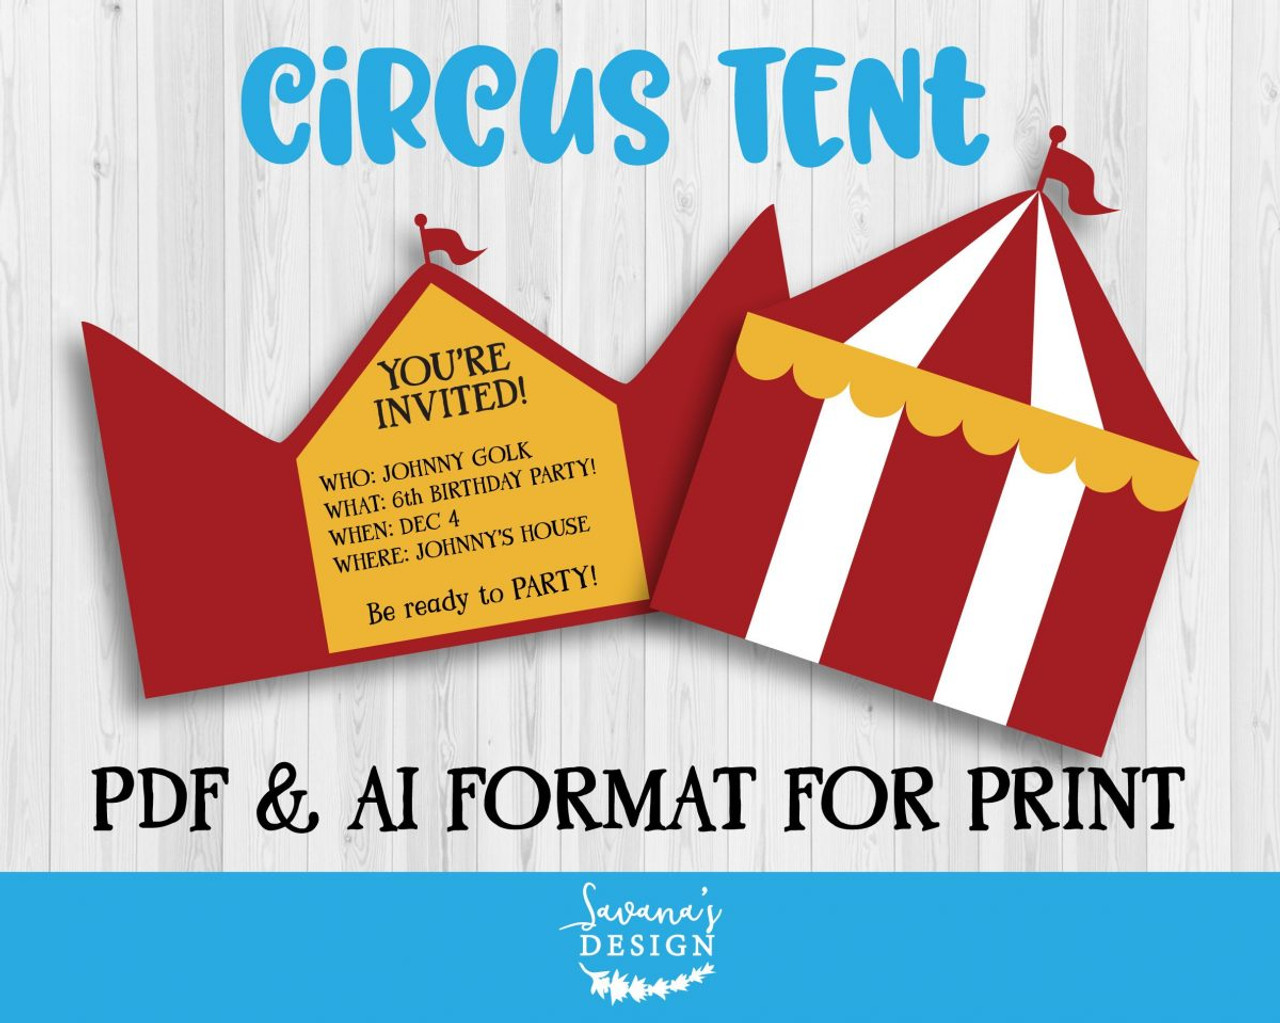 Download Circus Invitation Template Svg Eps Png Dxf Cut Files For Cricut And Silhouette Cameo By Savanasdesign